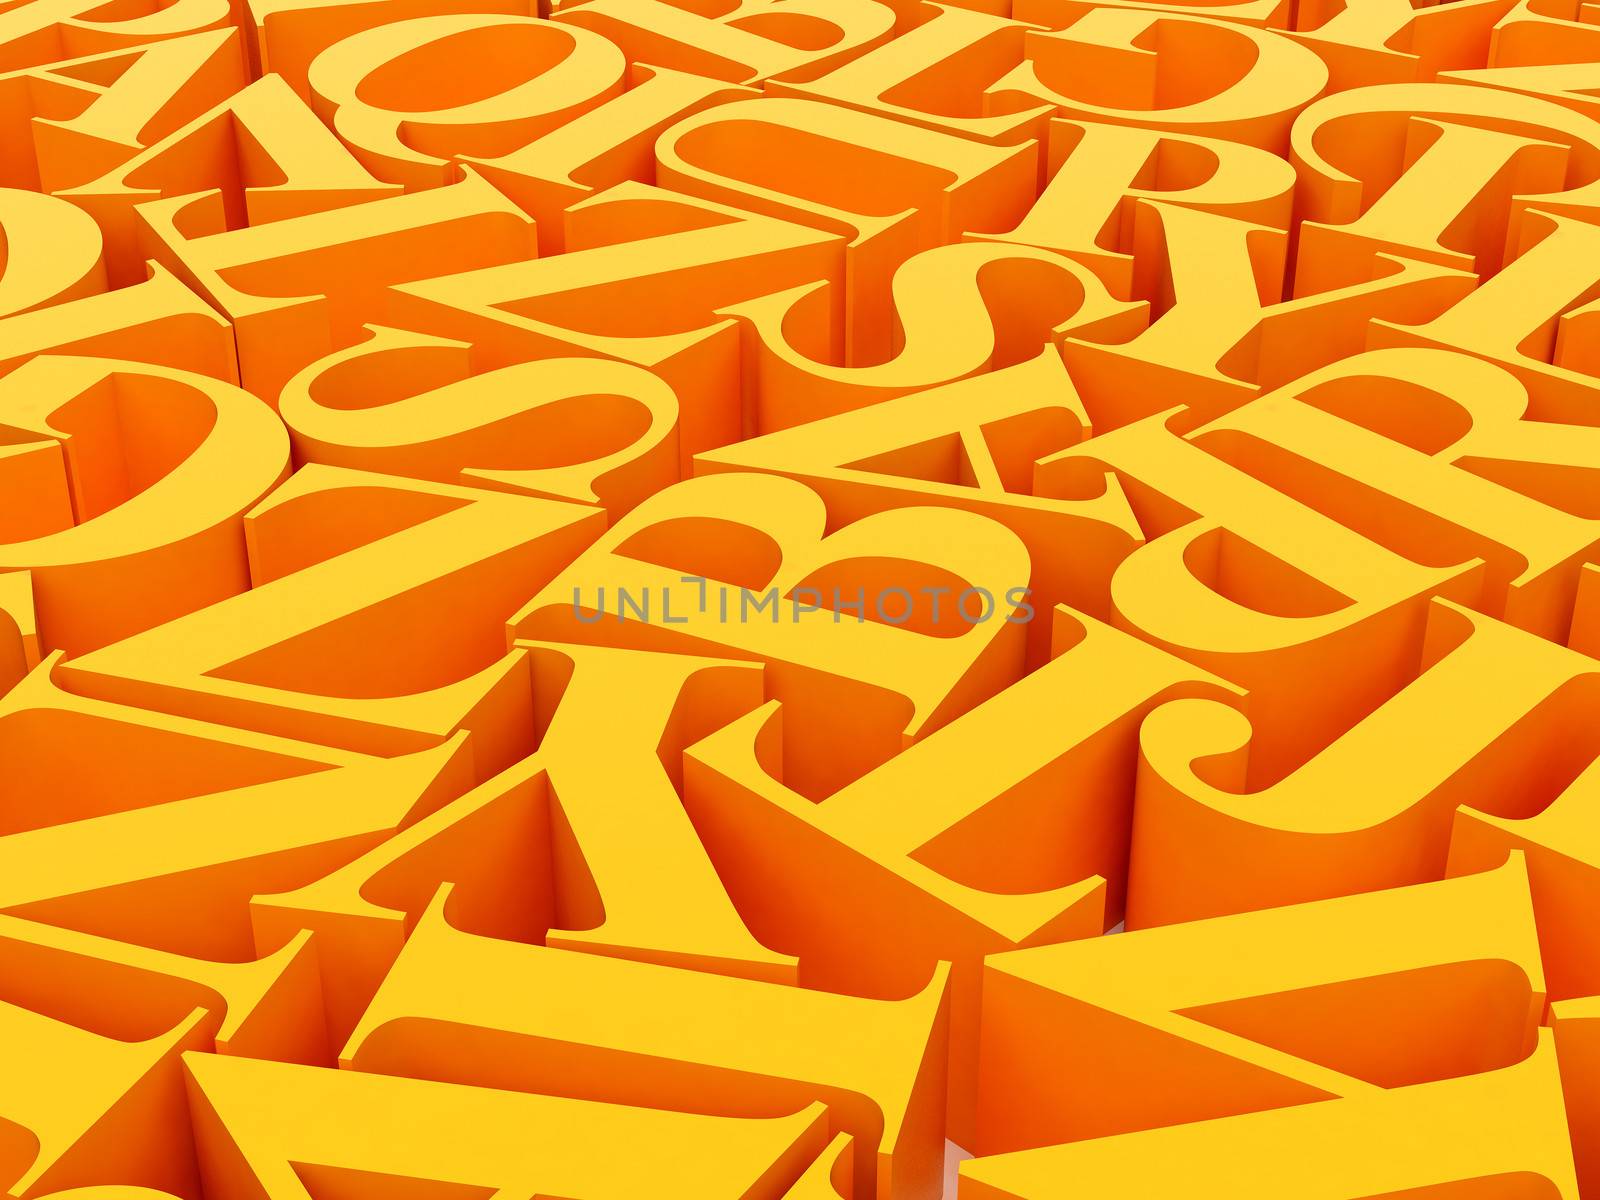 Background of alphabets by rook